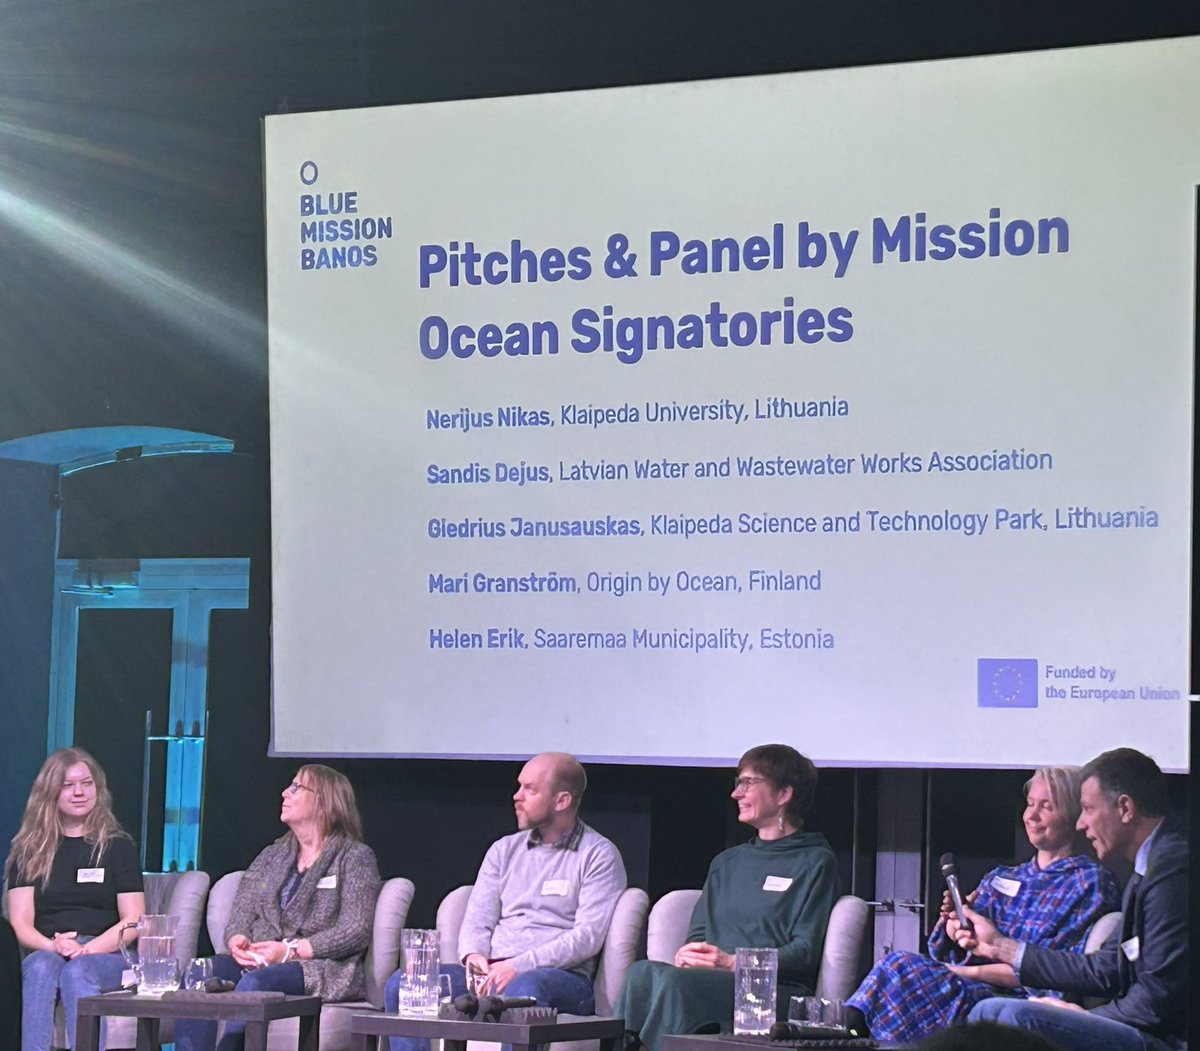 Role of local people and how #SaaremaaMunicipality engage them in better coastal planning was highlighted by Helen Erik at @MissionBANOS panel. Participatory GIS survey, a series of local community events have been organised in @BalticSea2Land.